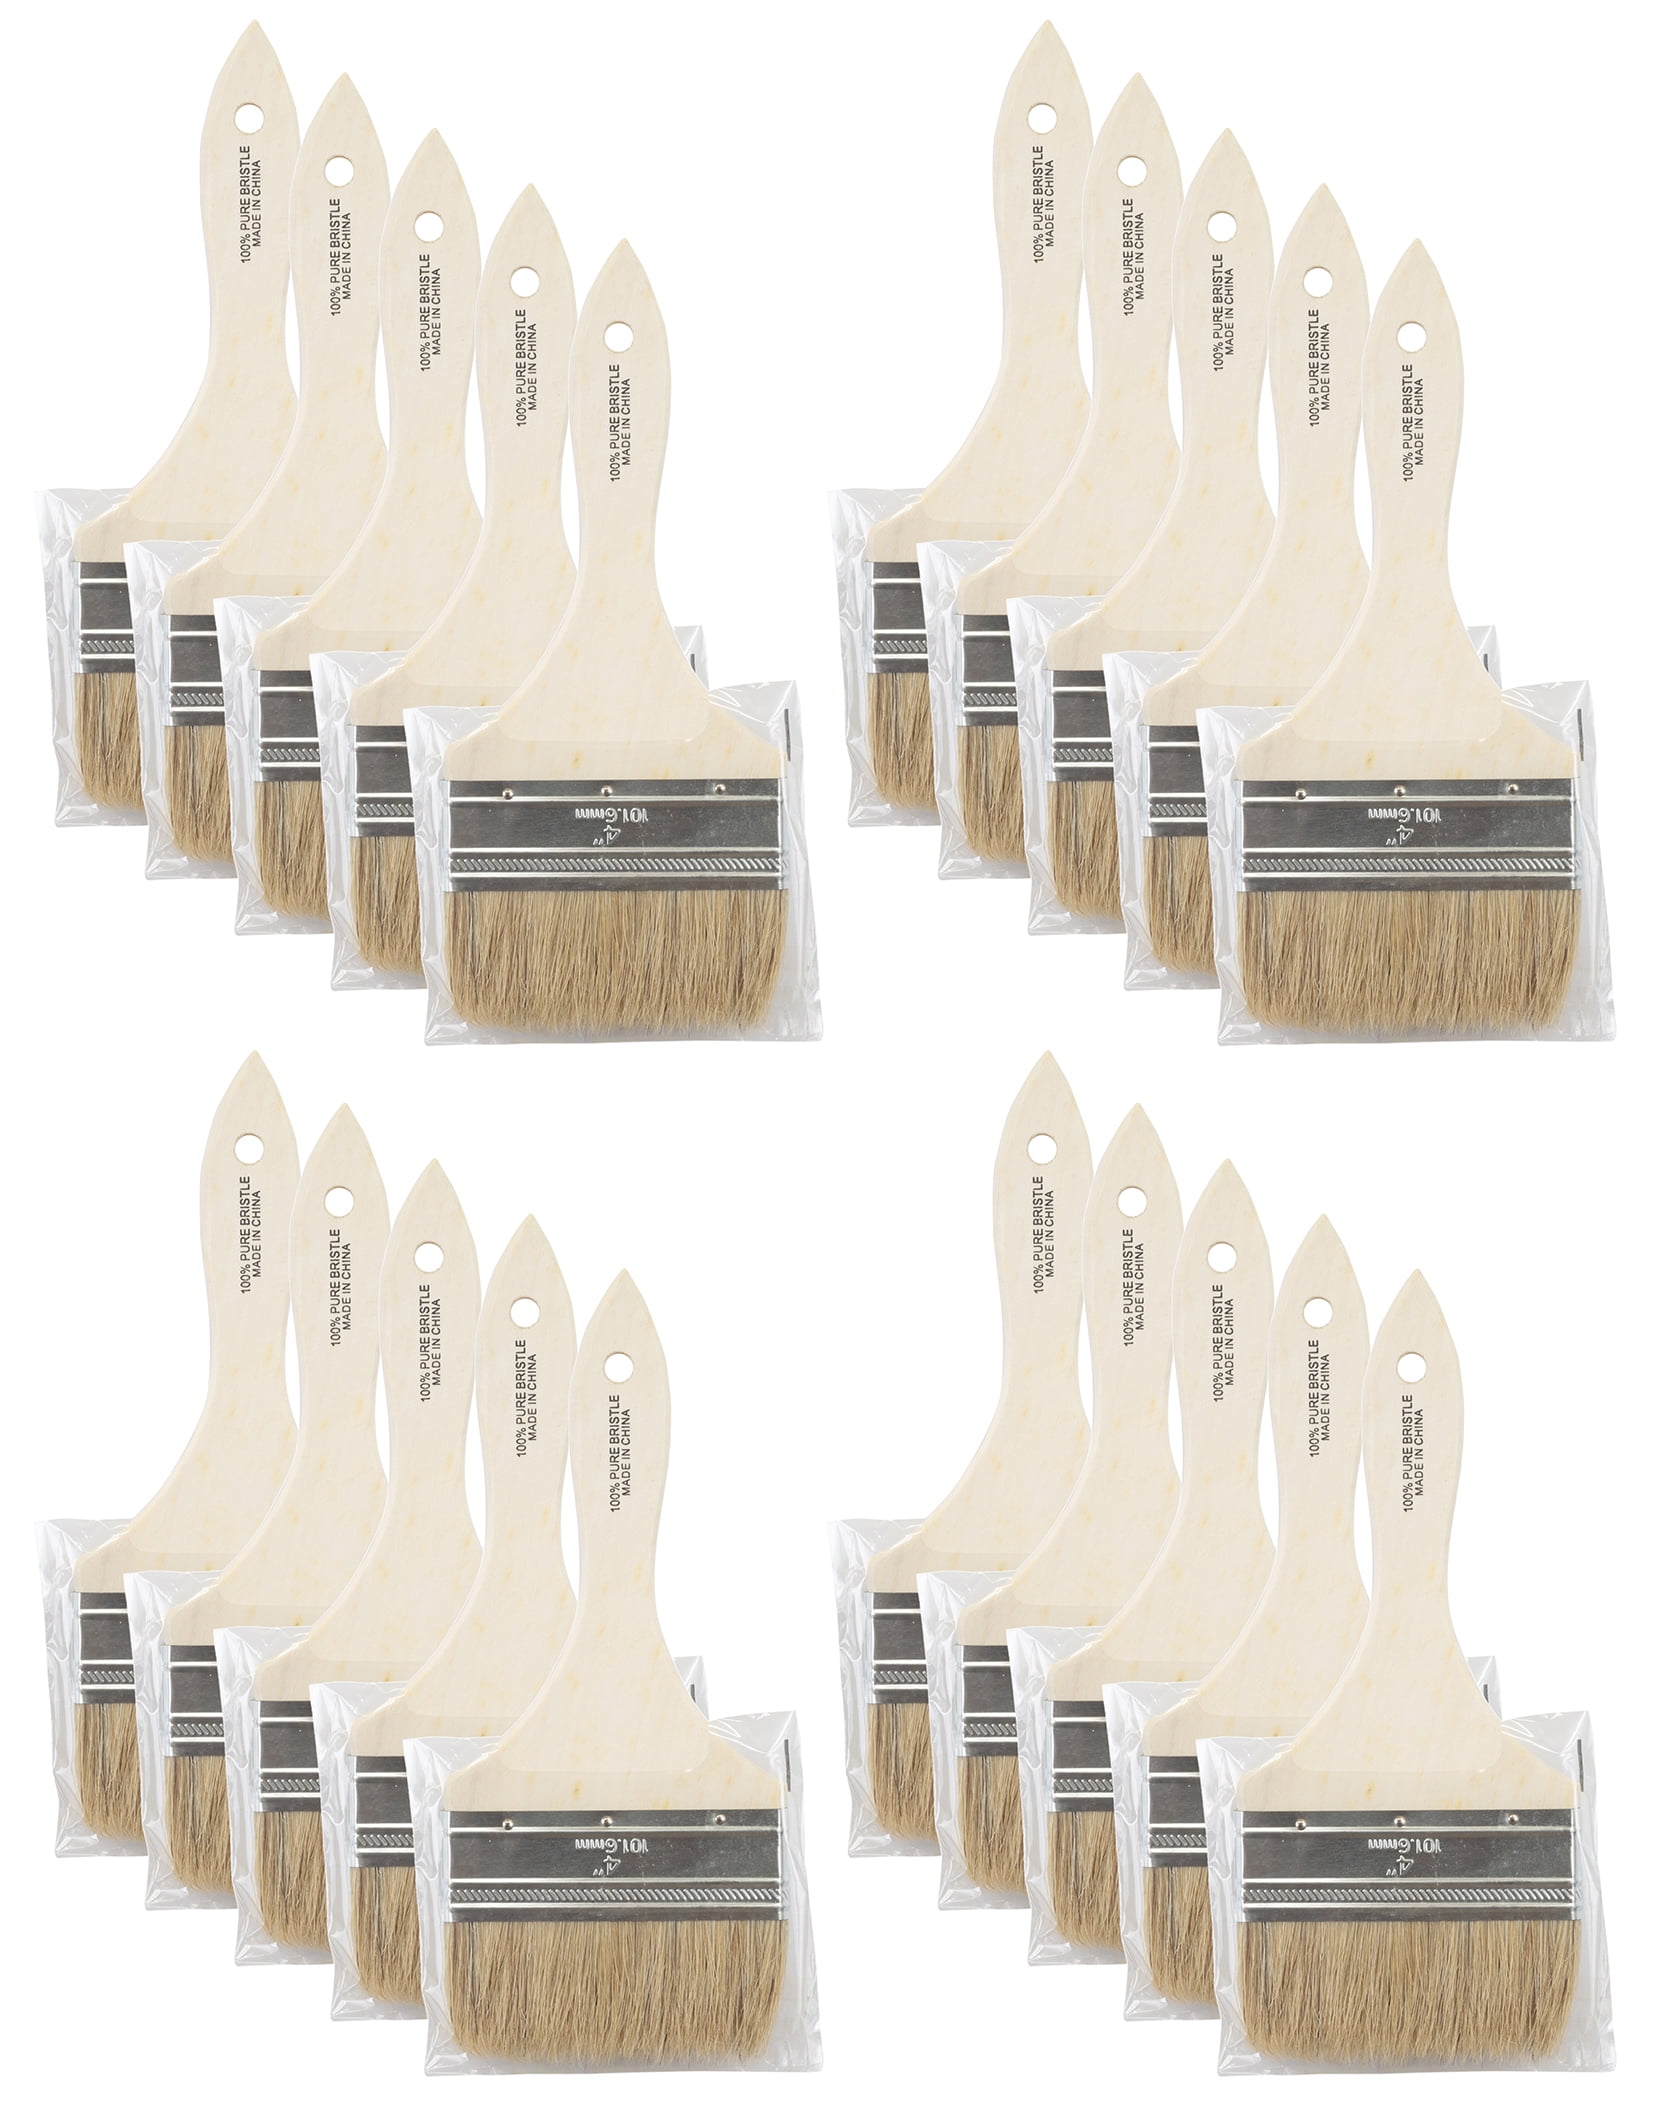 Wooster Genuine Gold Edge Variety 12 Sets of 3-Pack Variety Paintbrushes #5239-12PK